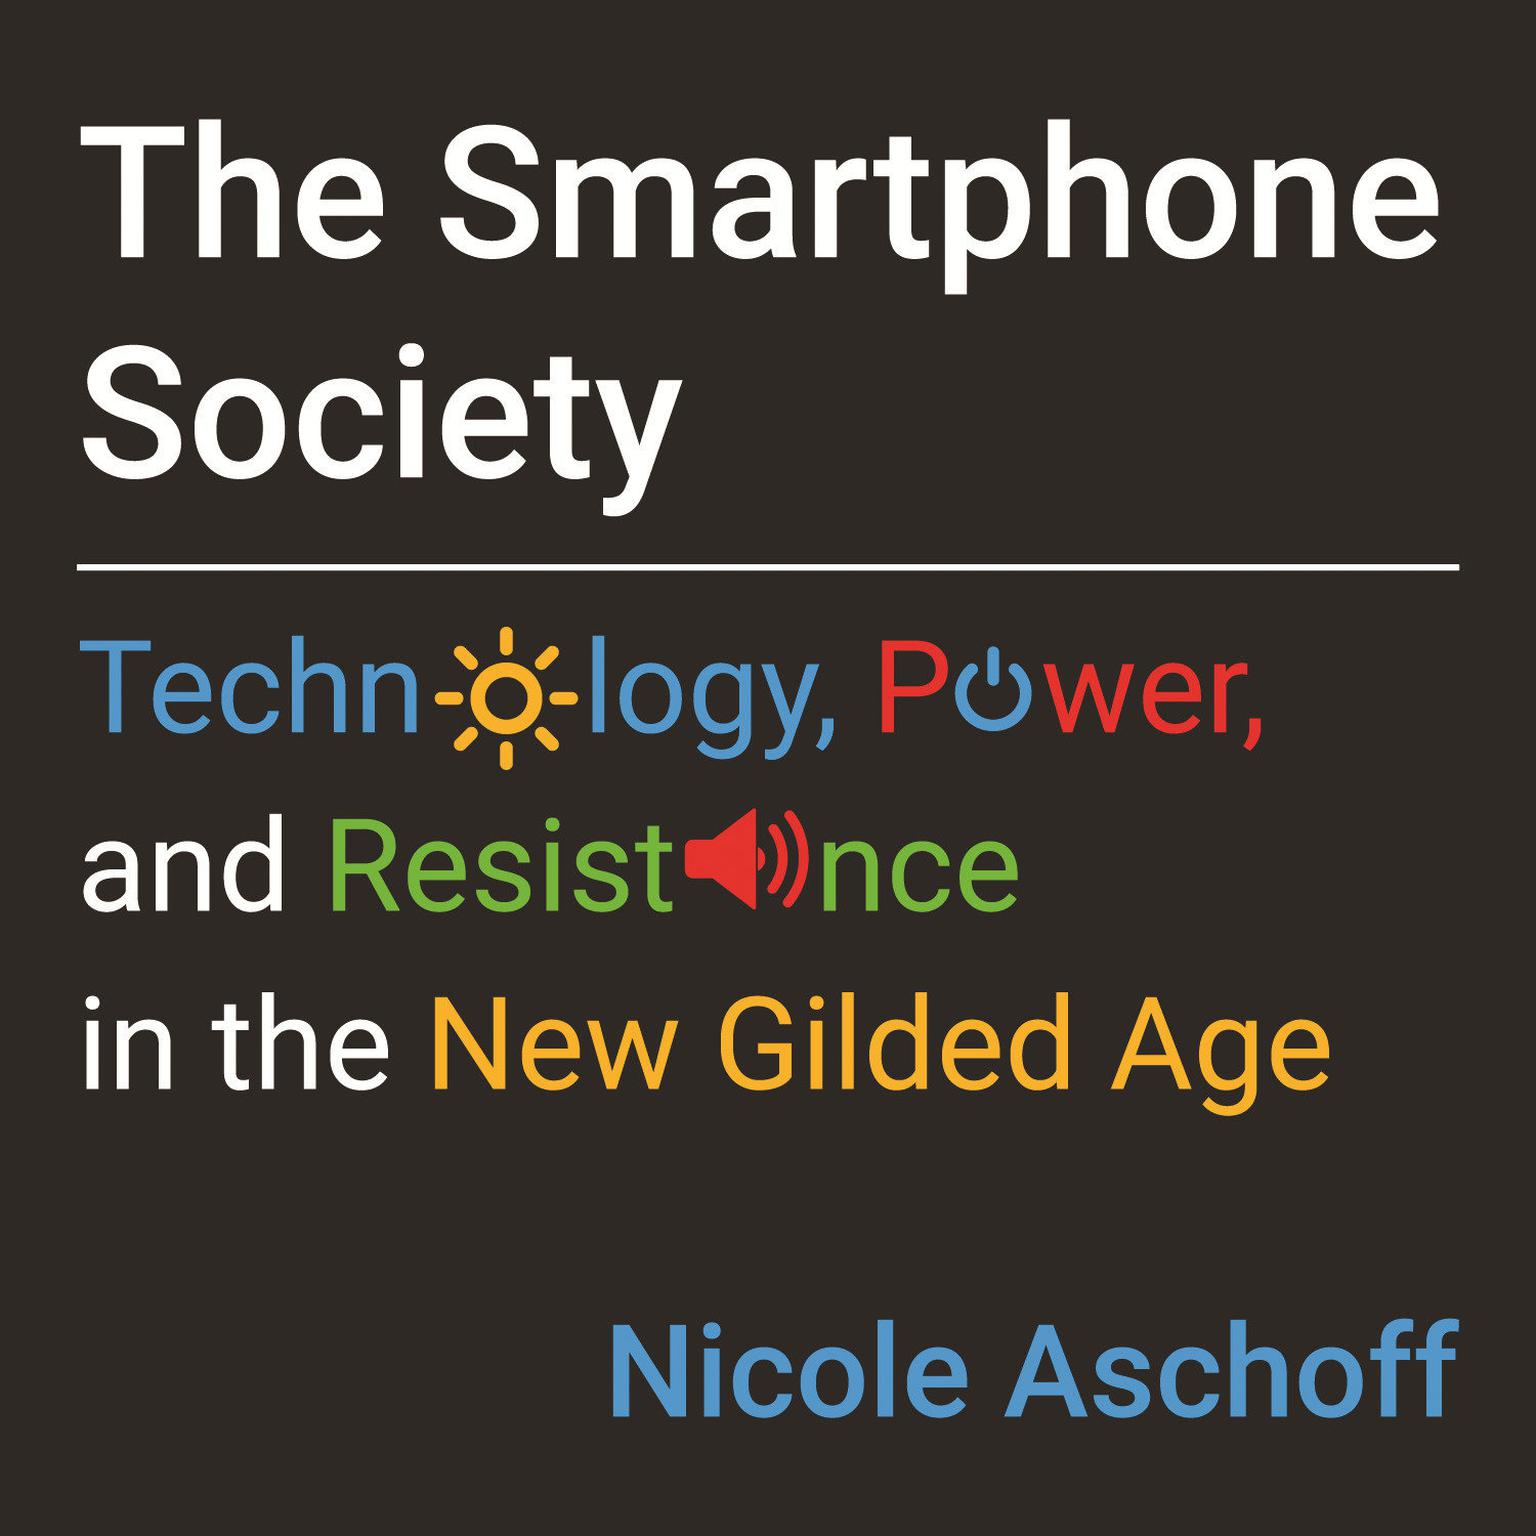 The Smartphone Society: Technology, Power, and Resistance in the New Gilded Age Audiobook, by Nicole Aschoff